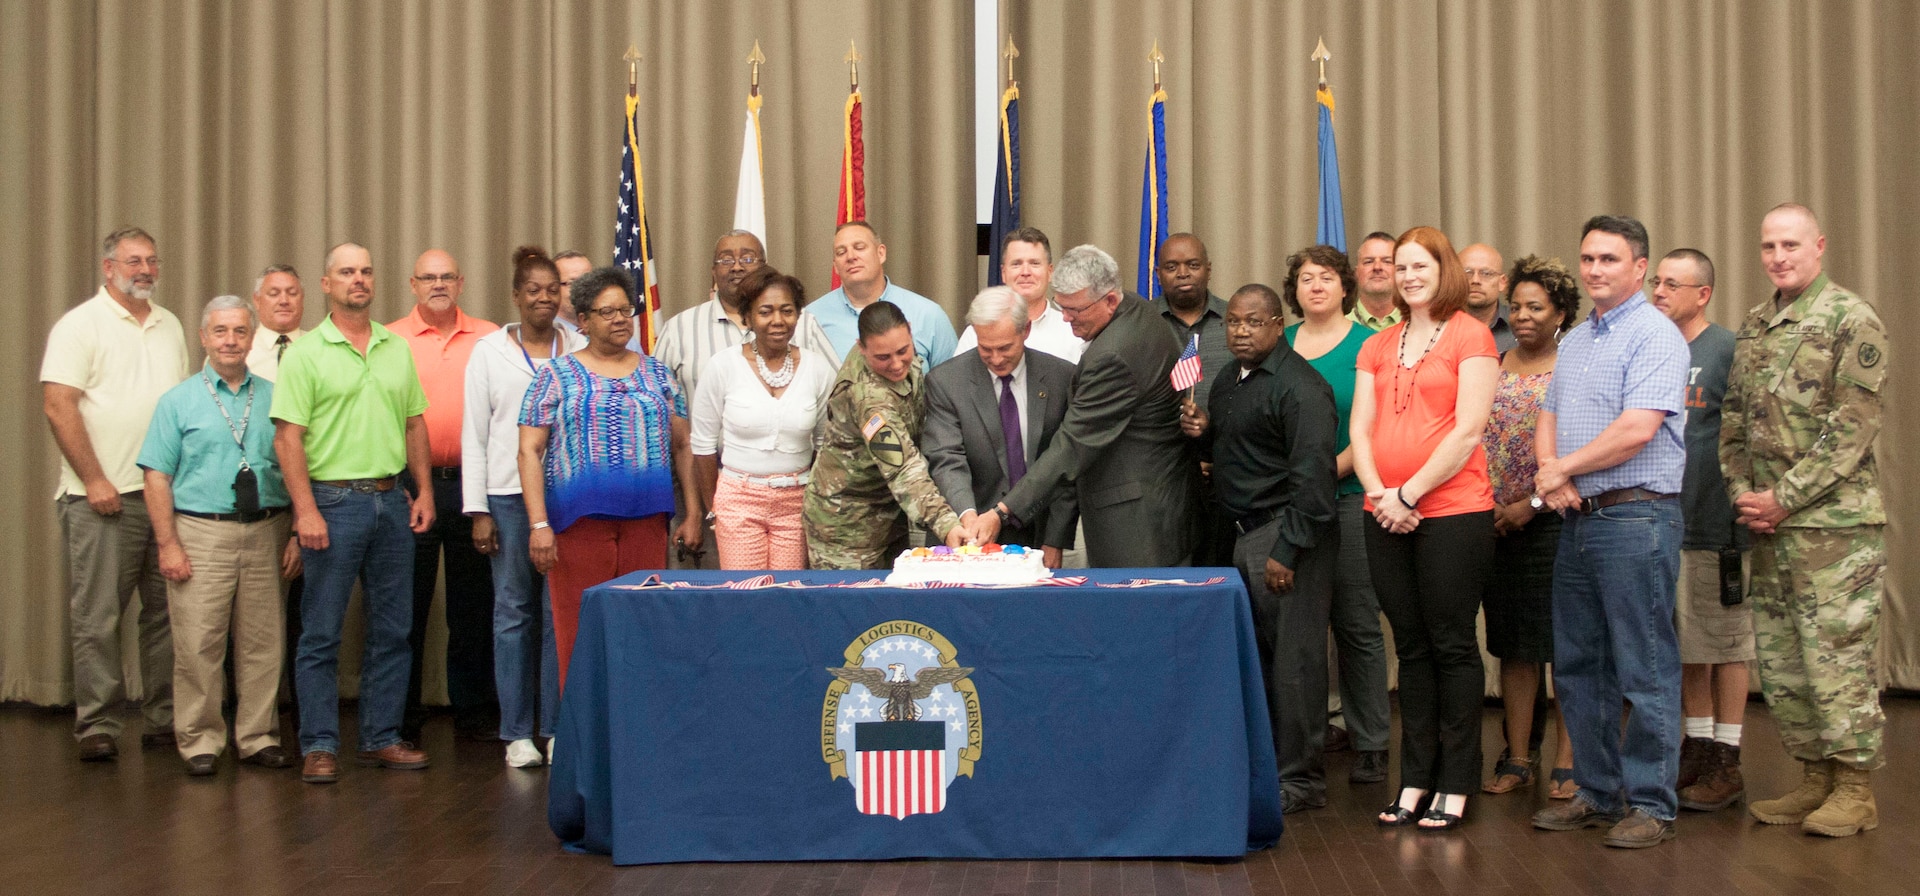 DLA Distribution Headquarters senior leaders, military members and civilian staff celebrated the U.S. Army’s 242nd Birthday on June 14, 2017.  